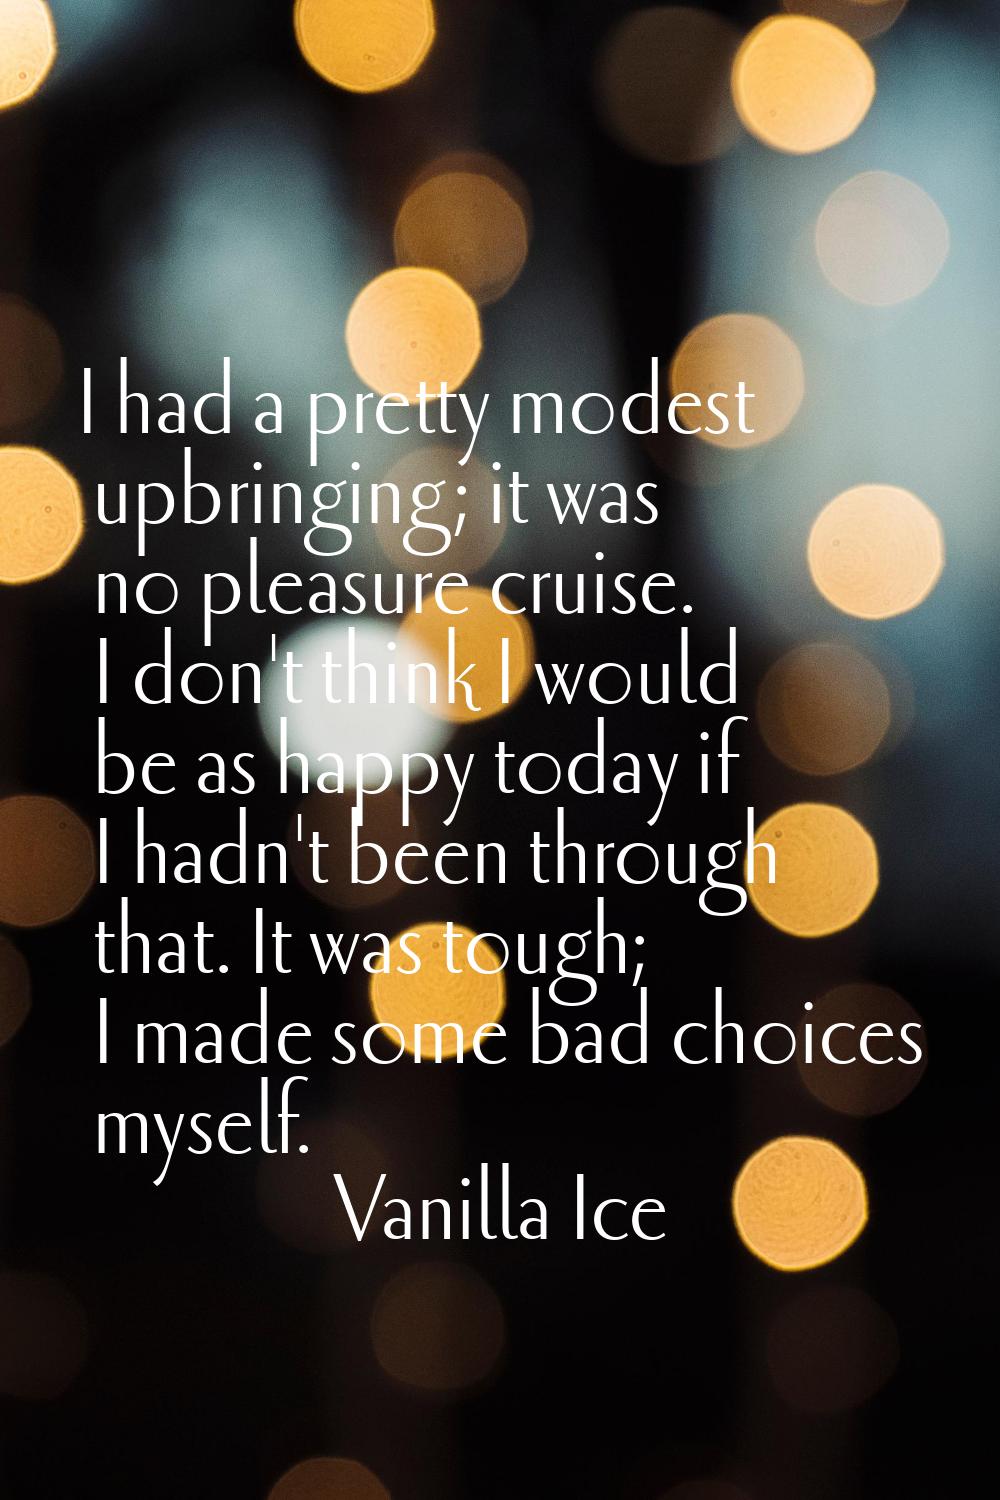 I had a pretty modest upbringing; it was no pleasure cruise. I don't think I would be as happy toda